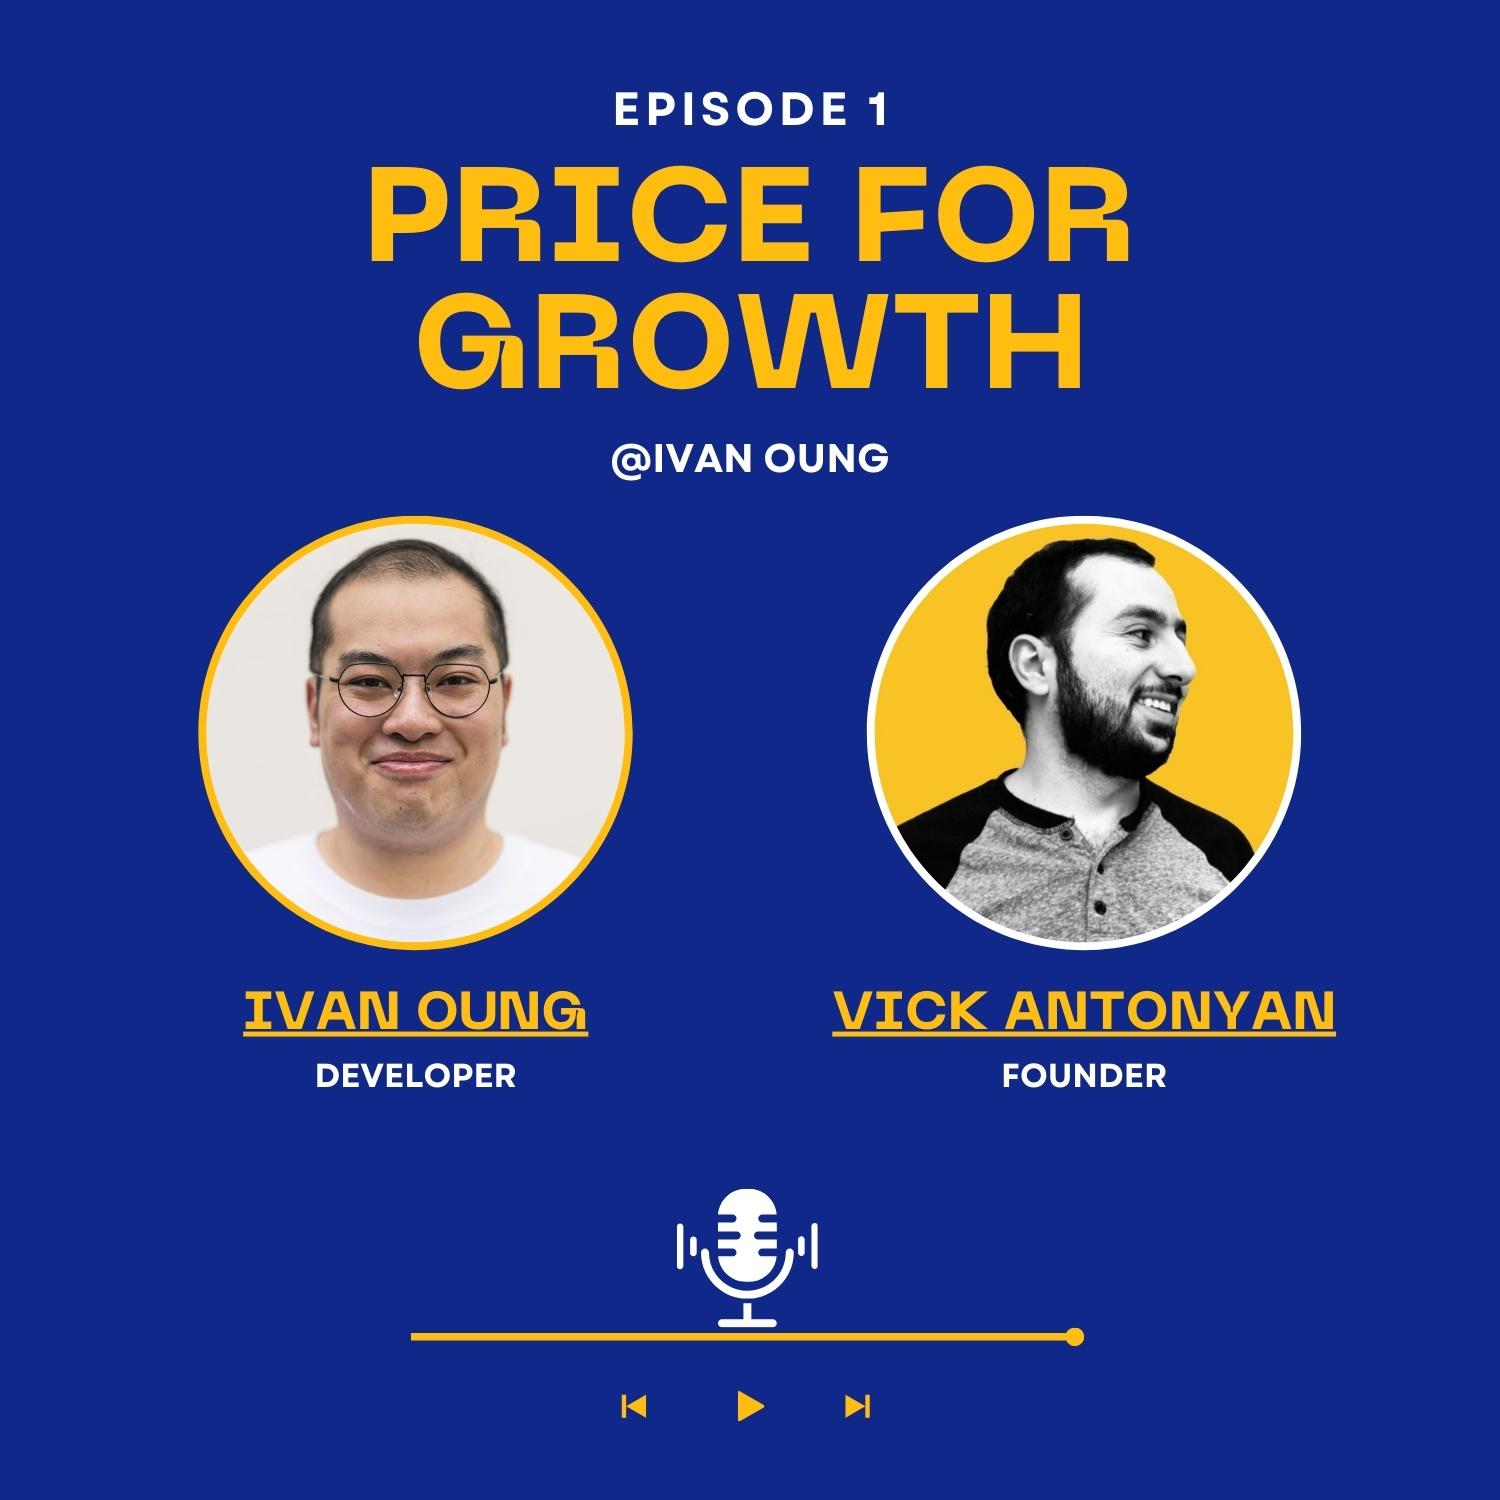 Vick Antonyan speaking about Product Management at Ivan Oung's podcast - "Price For Growth".